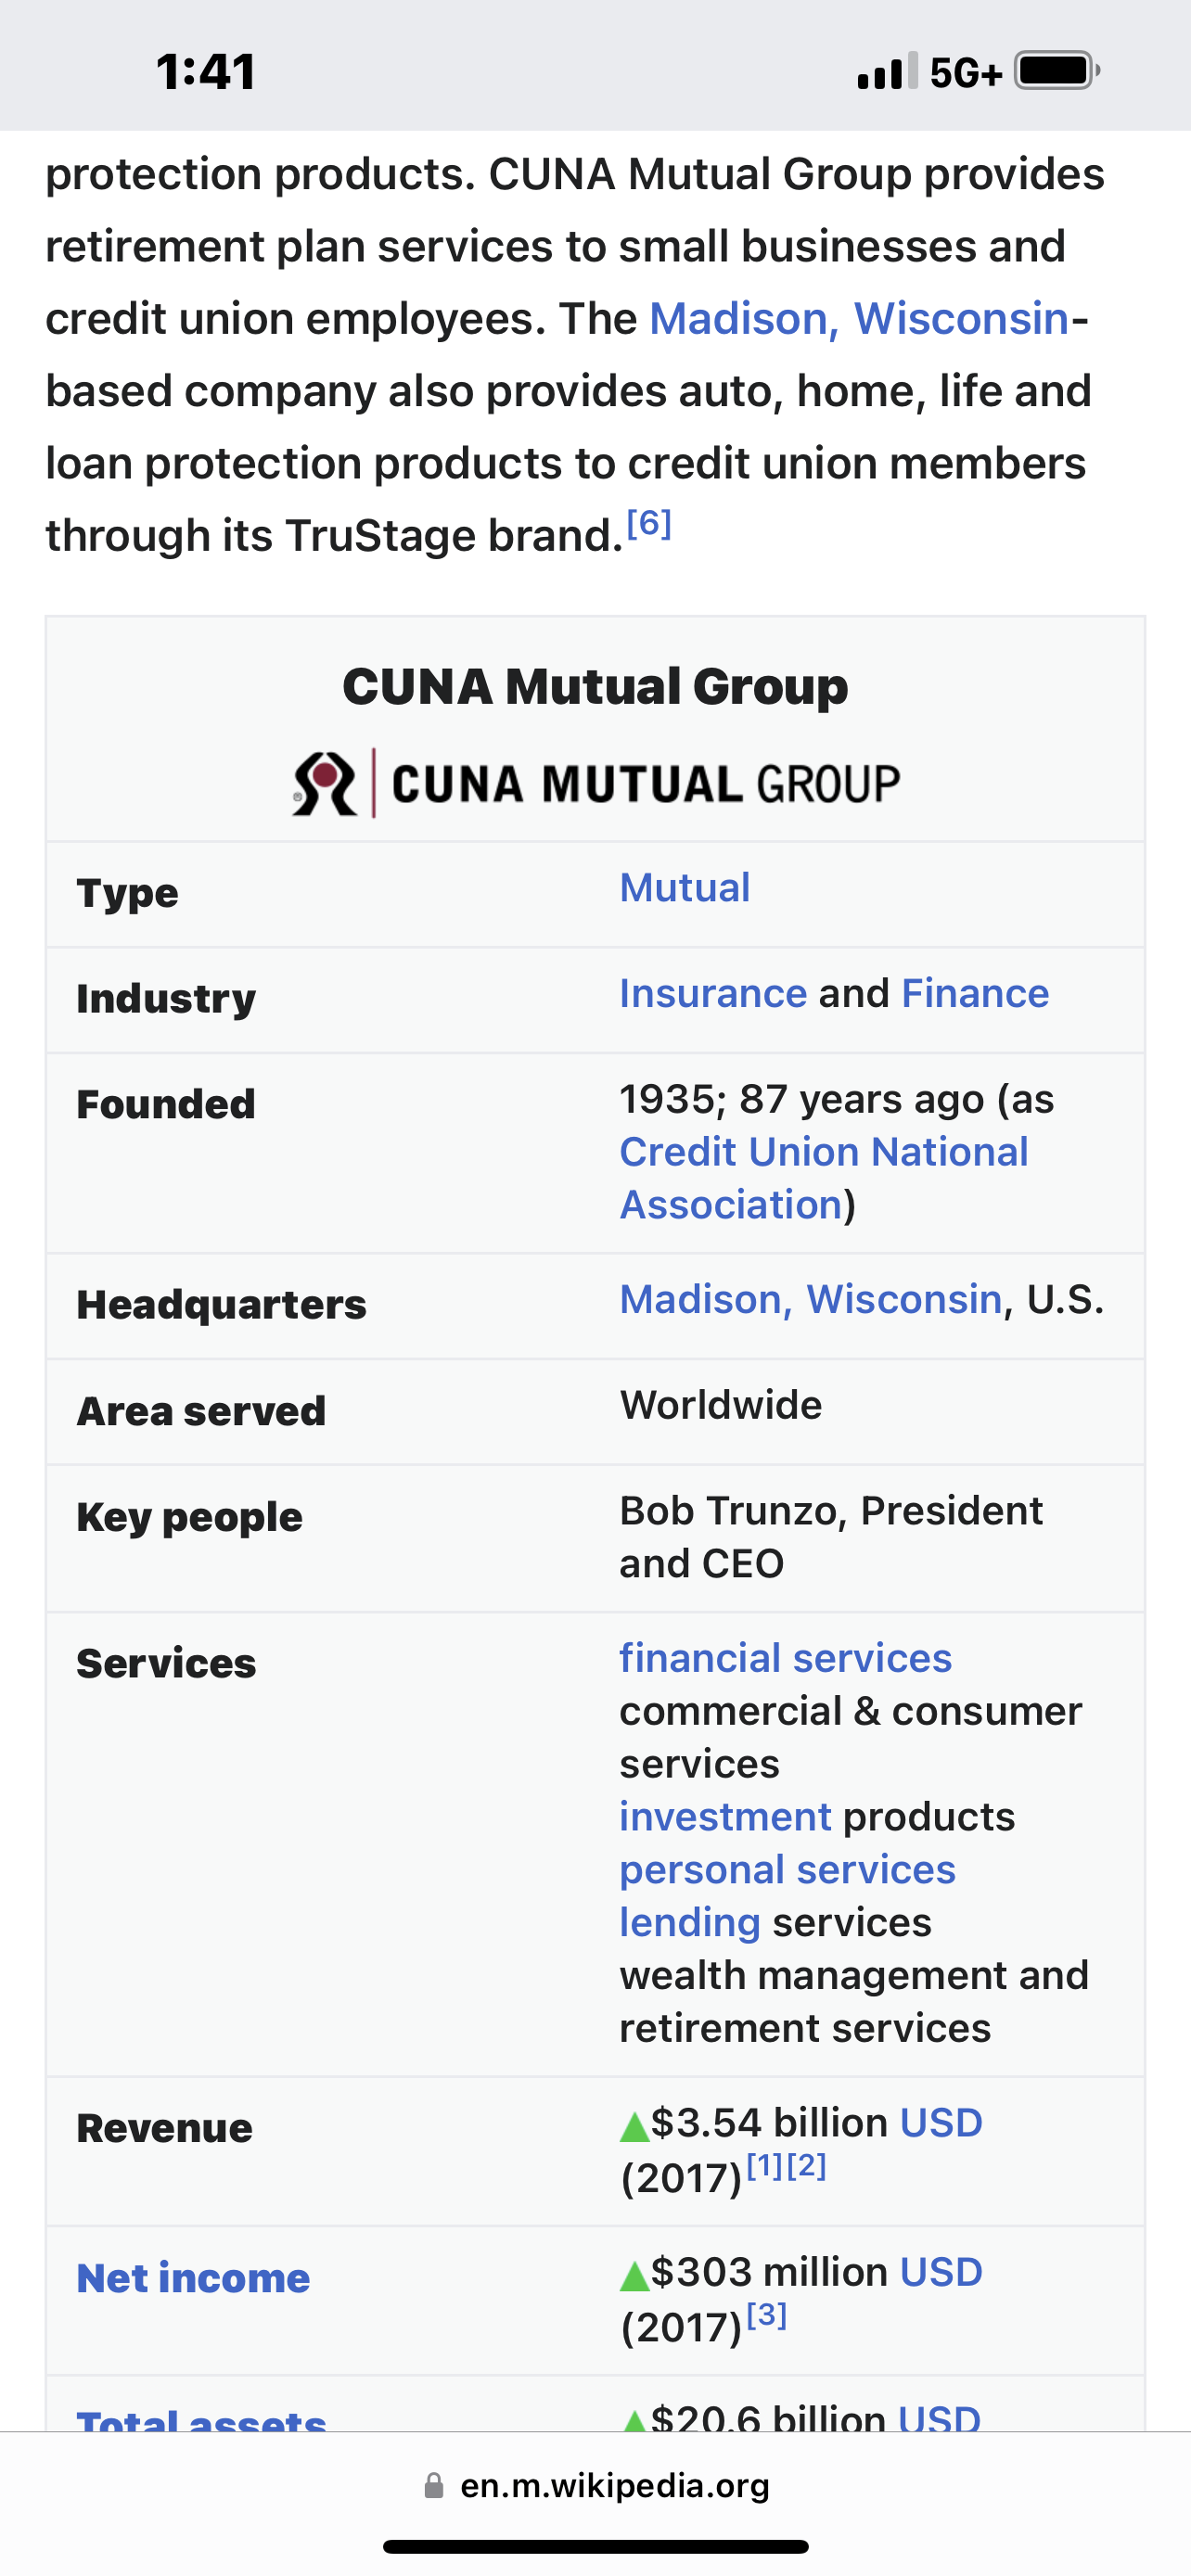 CUNA FROM WI LIKE PPP & FLOWMORE CUBAGE